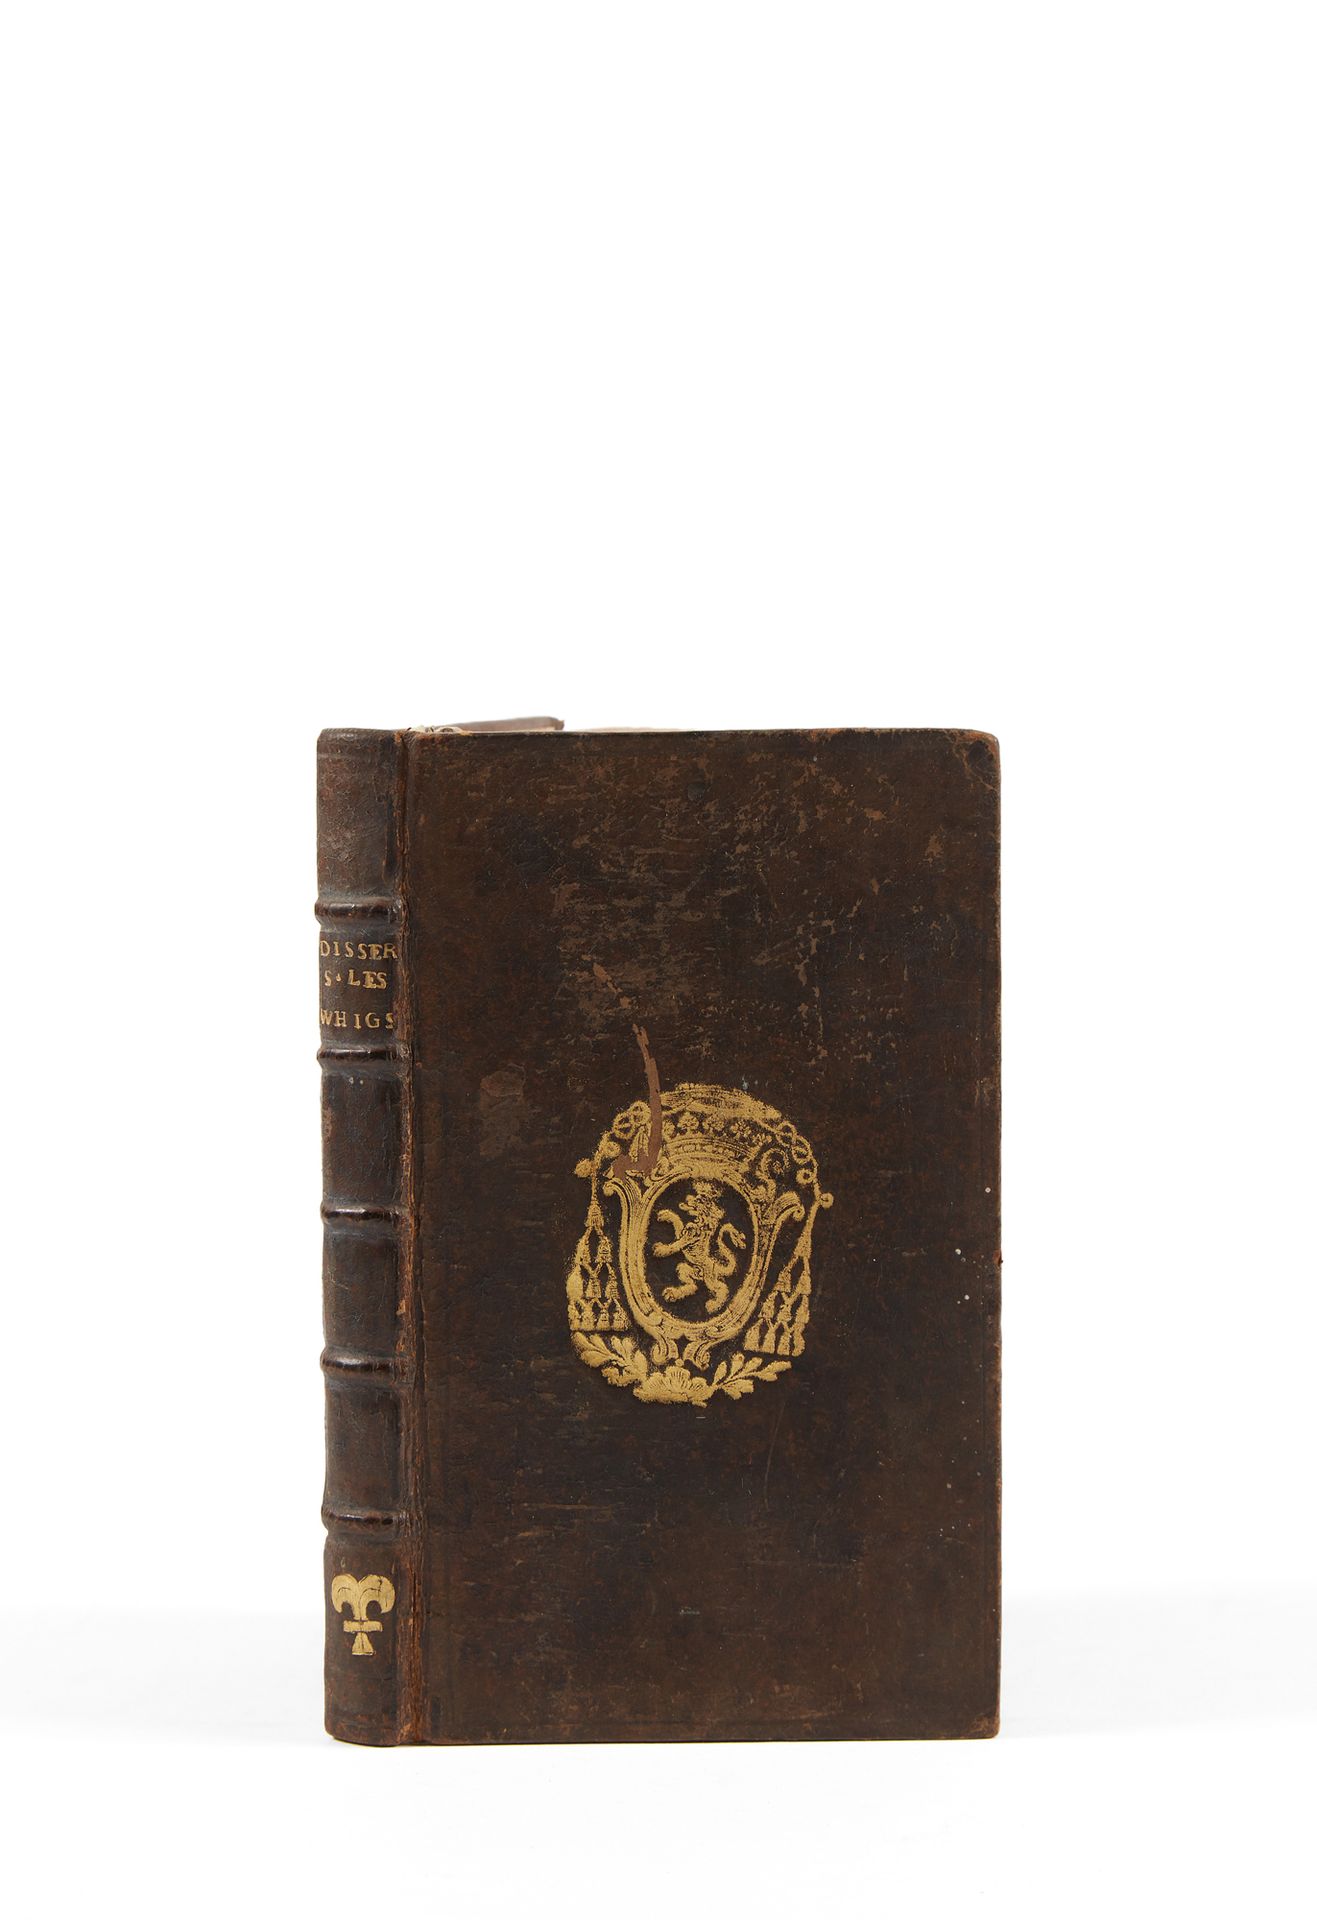 RAPIN DE THOYRAS, Paul. Dissertation on the Whigs and Torys. The Hague, Charles &hellip;